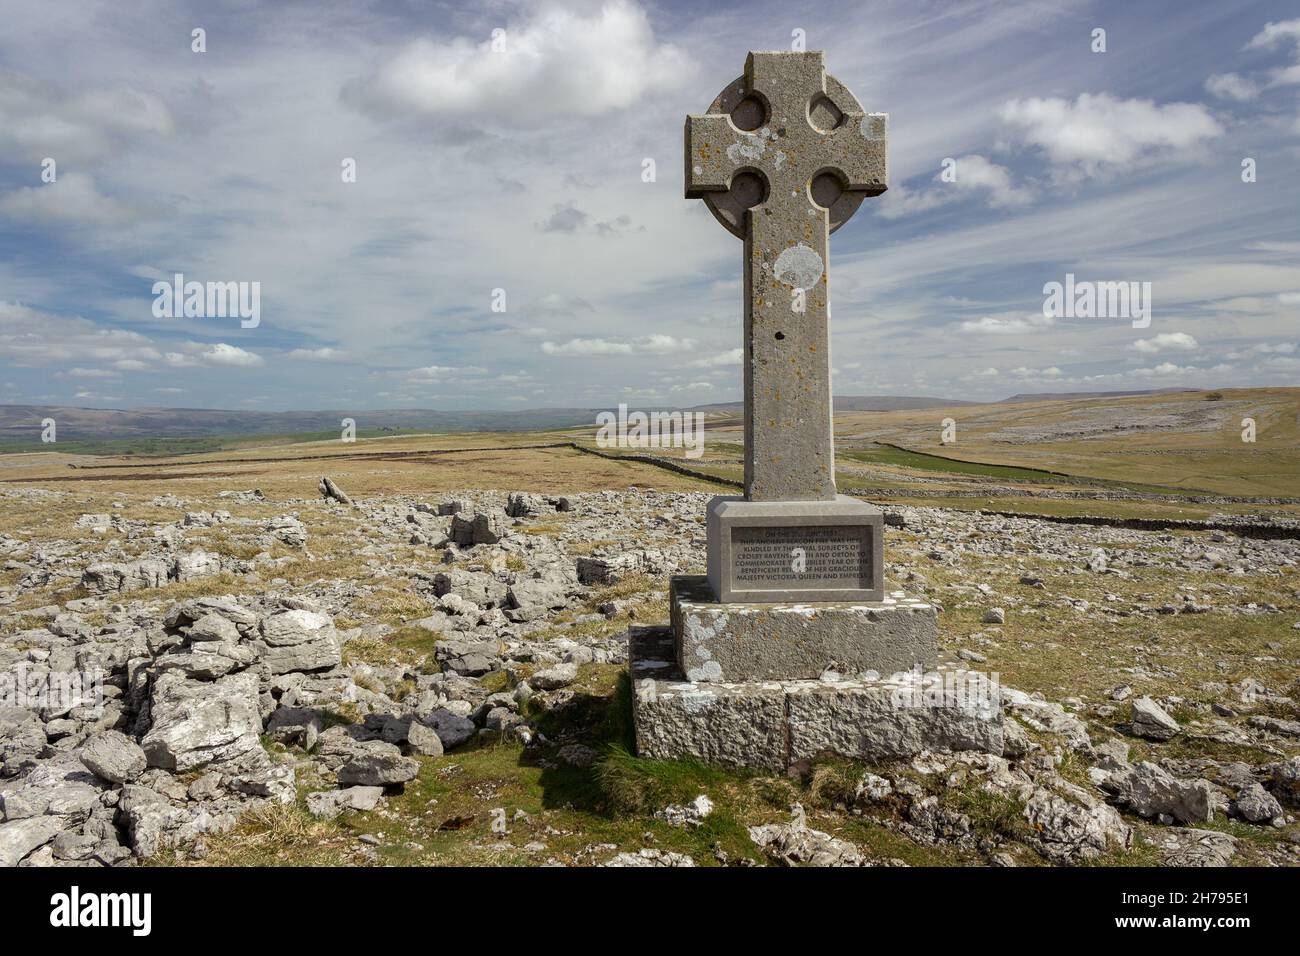 Cumbria, UK: Queen Victoria jubilee monument on Beacon Hill, Orton Scar. The limestone pavement of Great Asby Scar can be seen in the background. Stock Photo